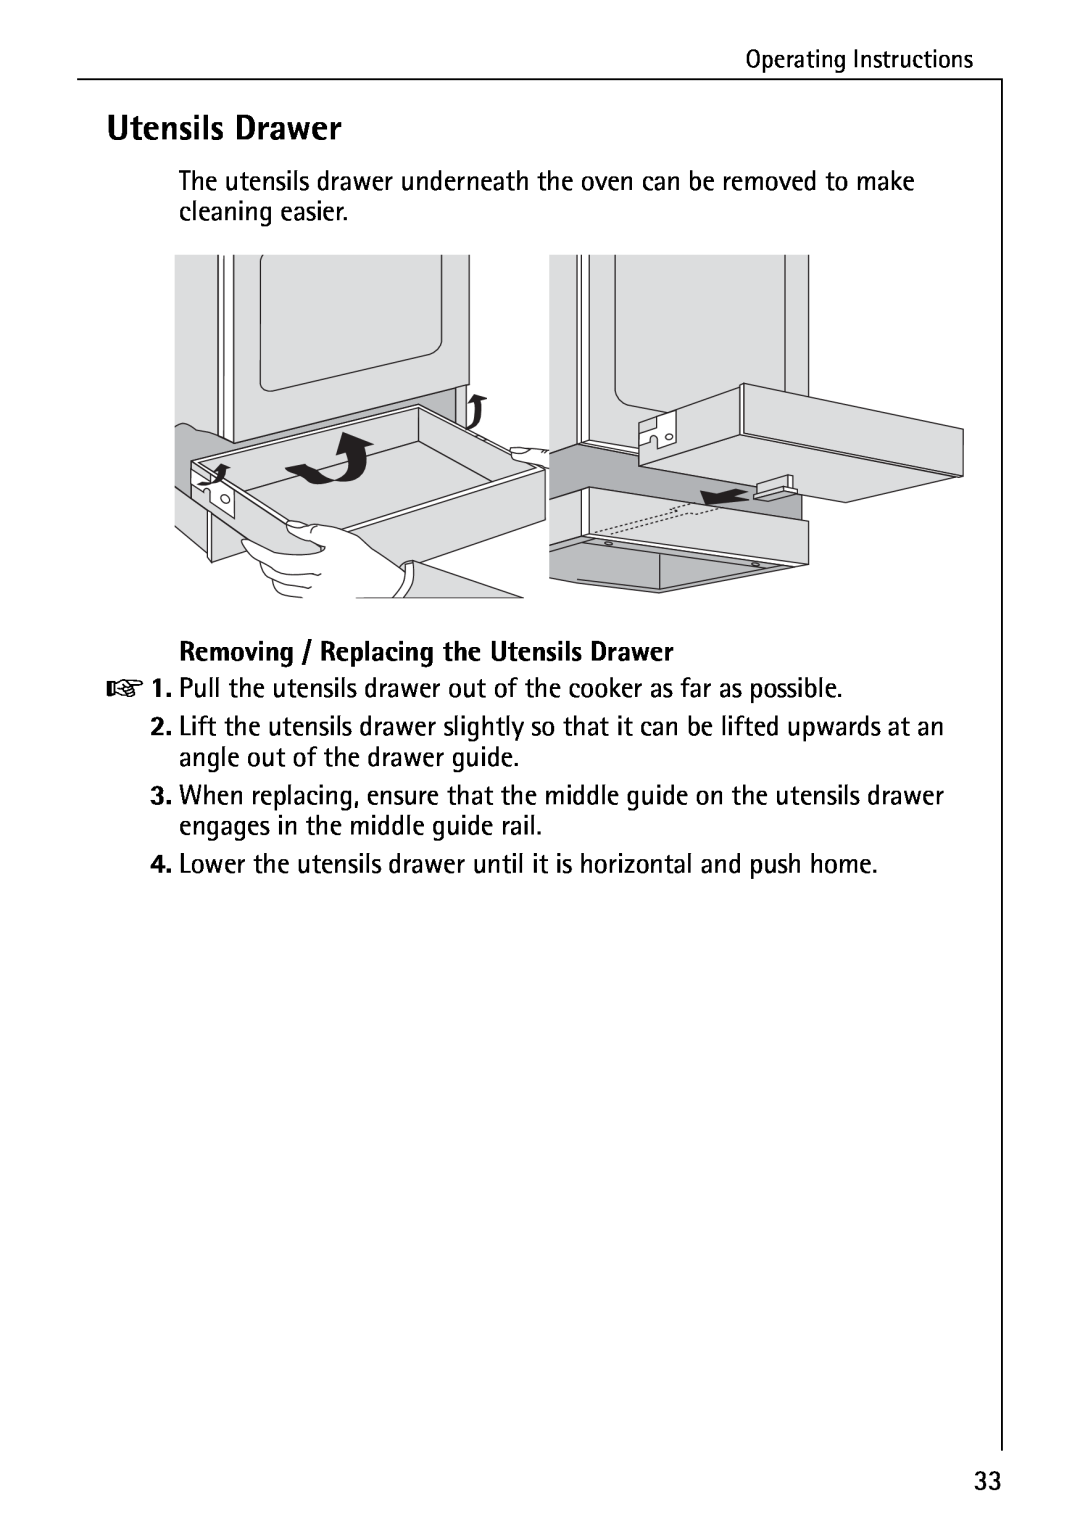 AEG 2003 F operating instructions Removing / Replacing the Utensils Drawer 